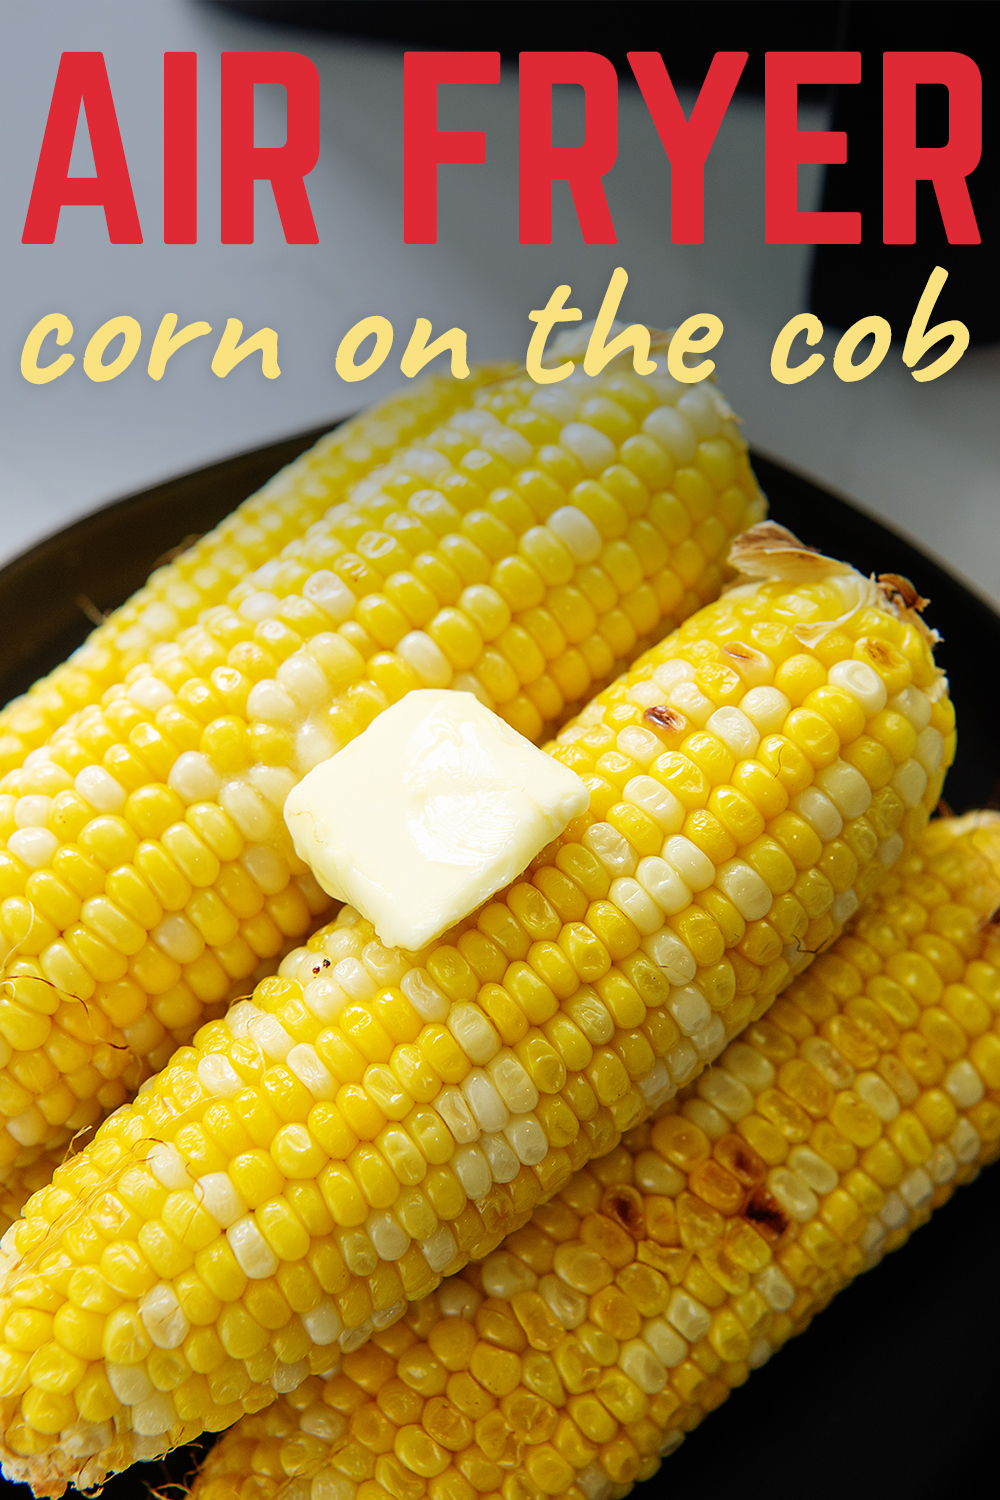 We loved how easy it was to make this delicious corn on the cob in the air fryer!